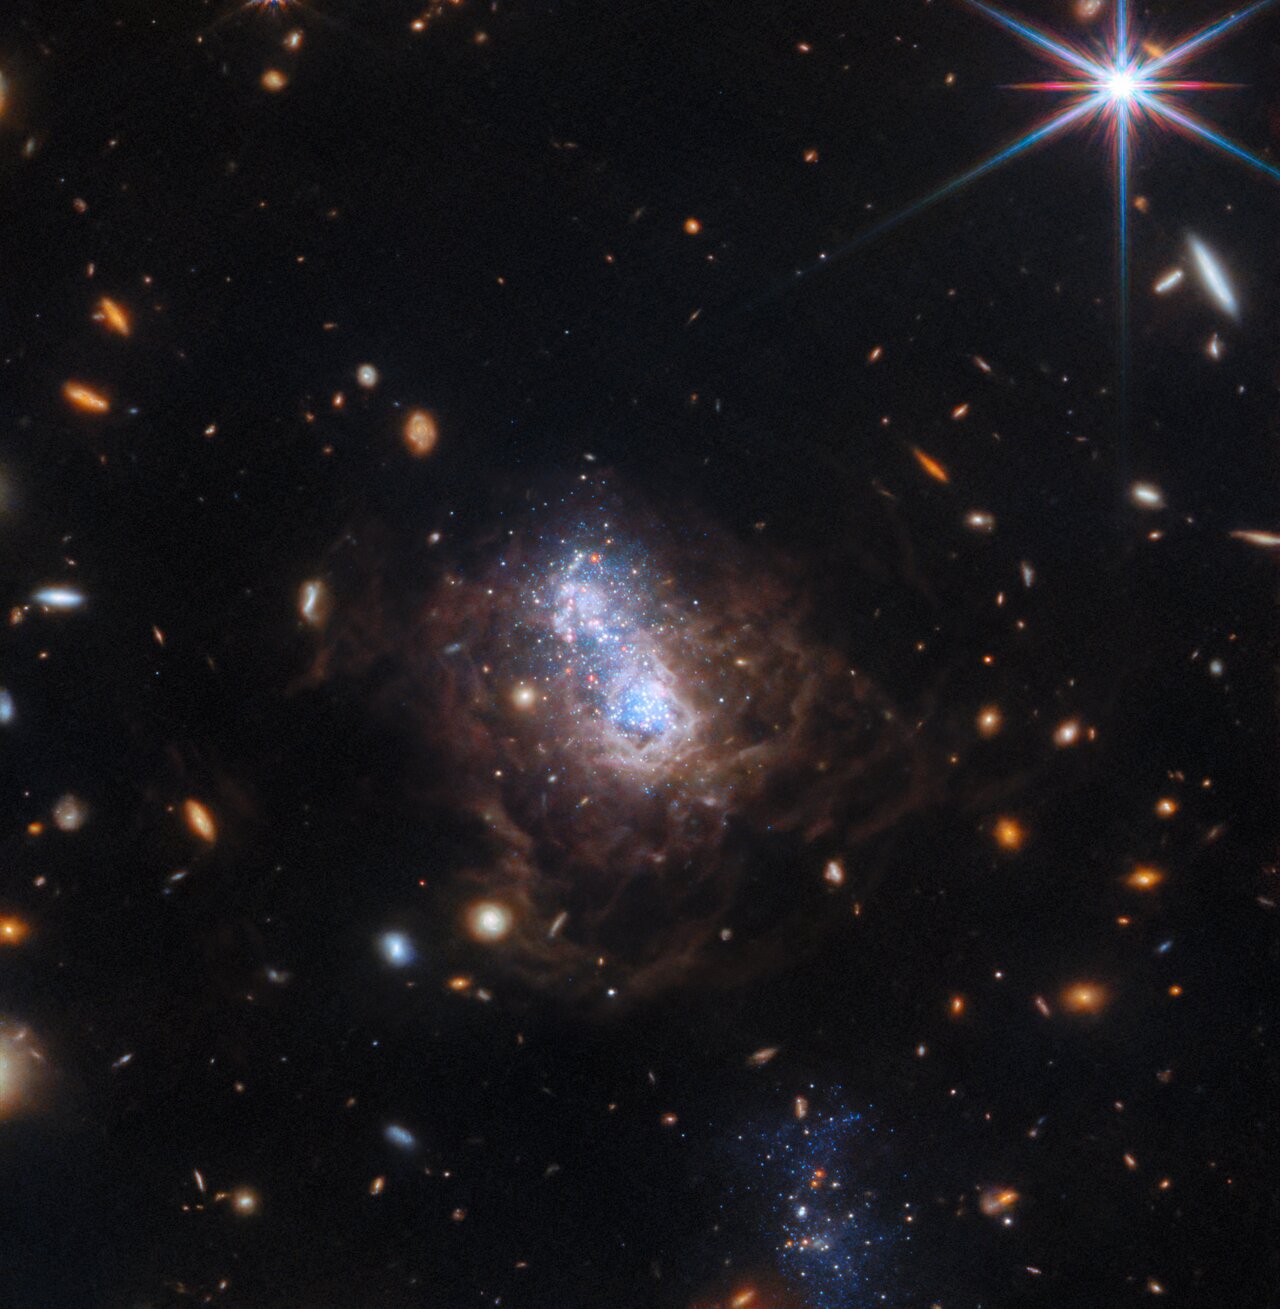 A black background is dotted with numerous white elliptical and red spiral galaxies. A dwarf irregular galaxy dominates the image, with a bright area of ​​white and blue stars at its center that look like two distinct clumps. This area is surrounded by brown dust filaments. A companion galaxy can be seen in the lower center of the image, which looks like a cluster of blue stars. In the upper right corner is a very prominent bright star with eight long diffraction spikes.